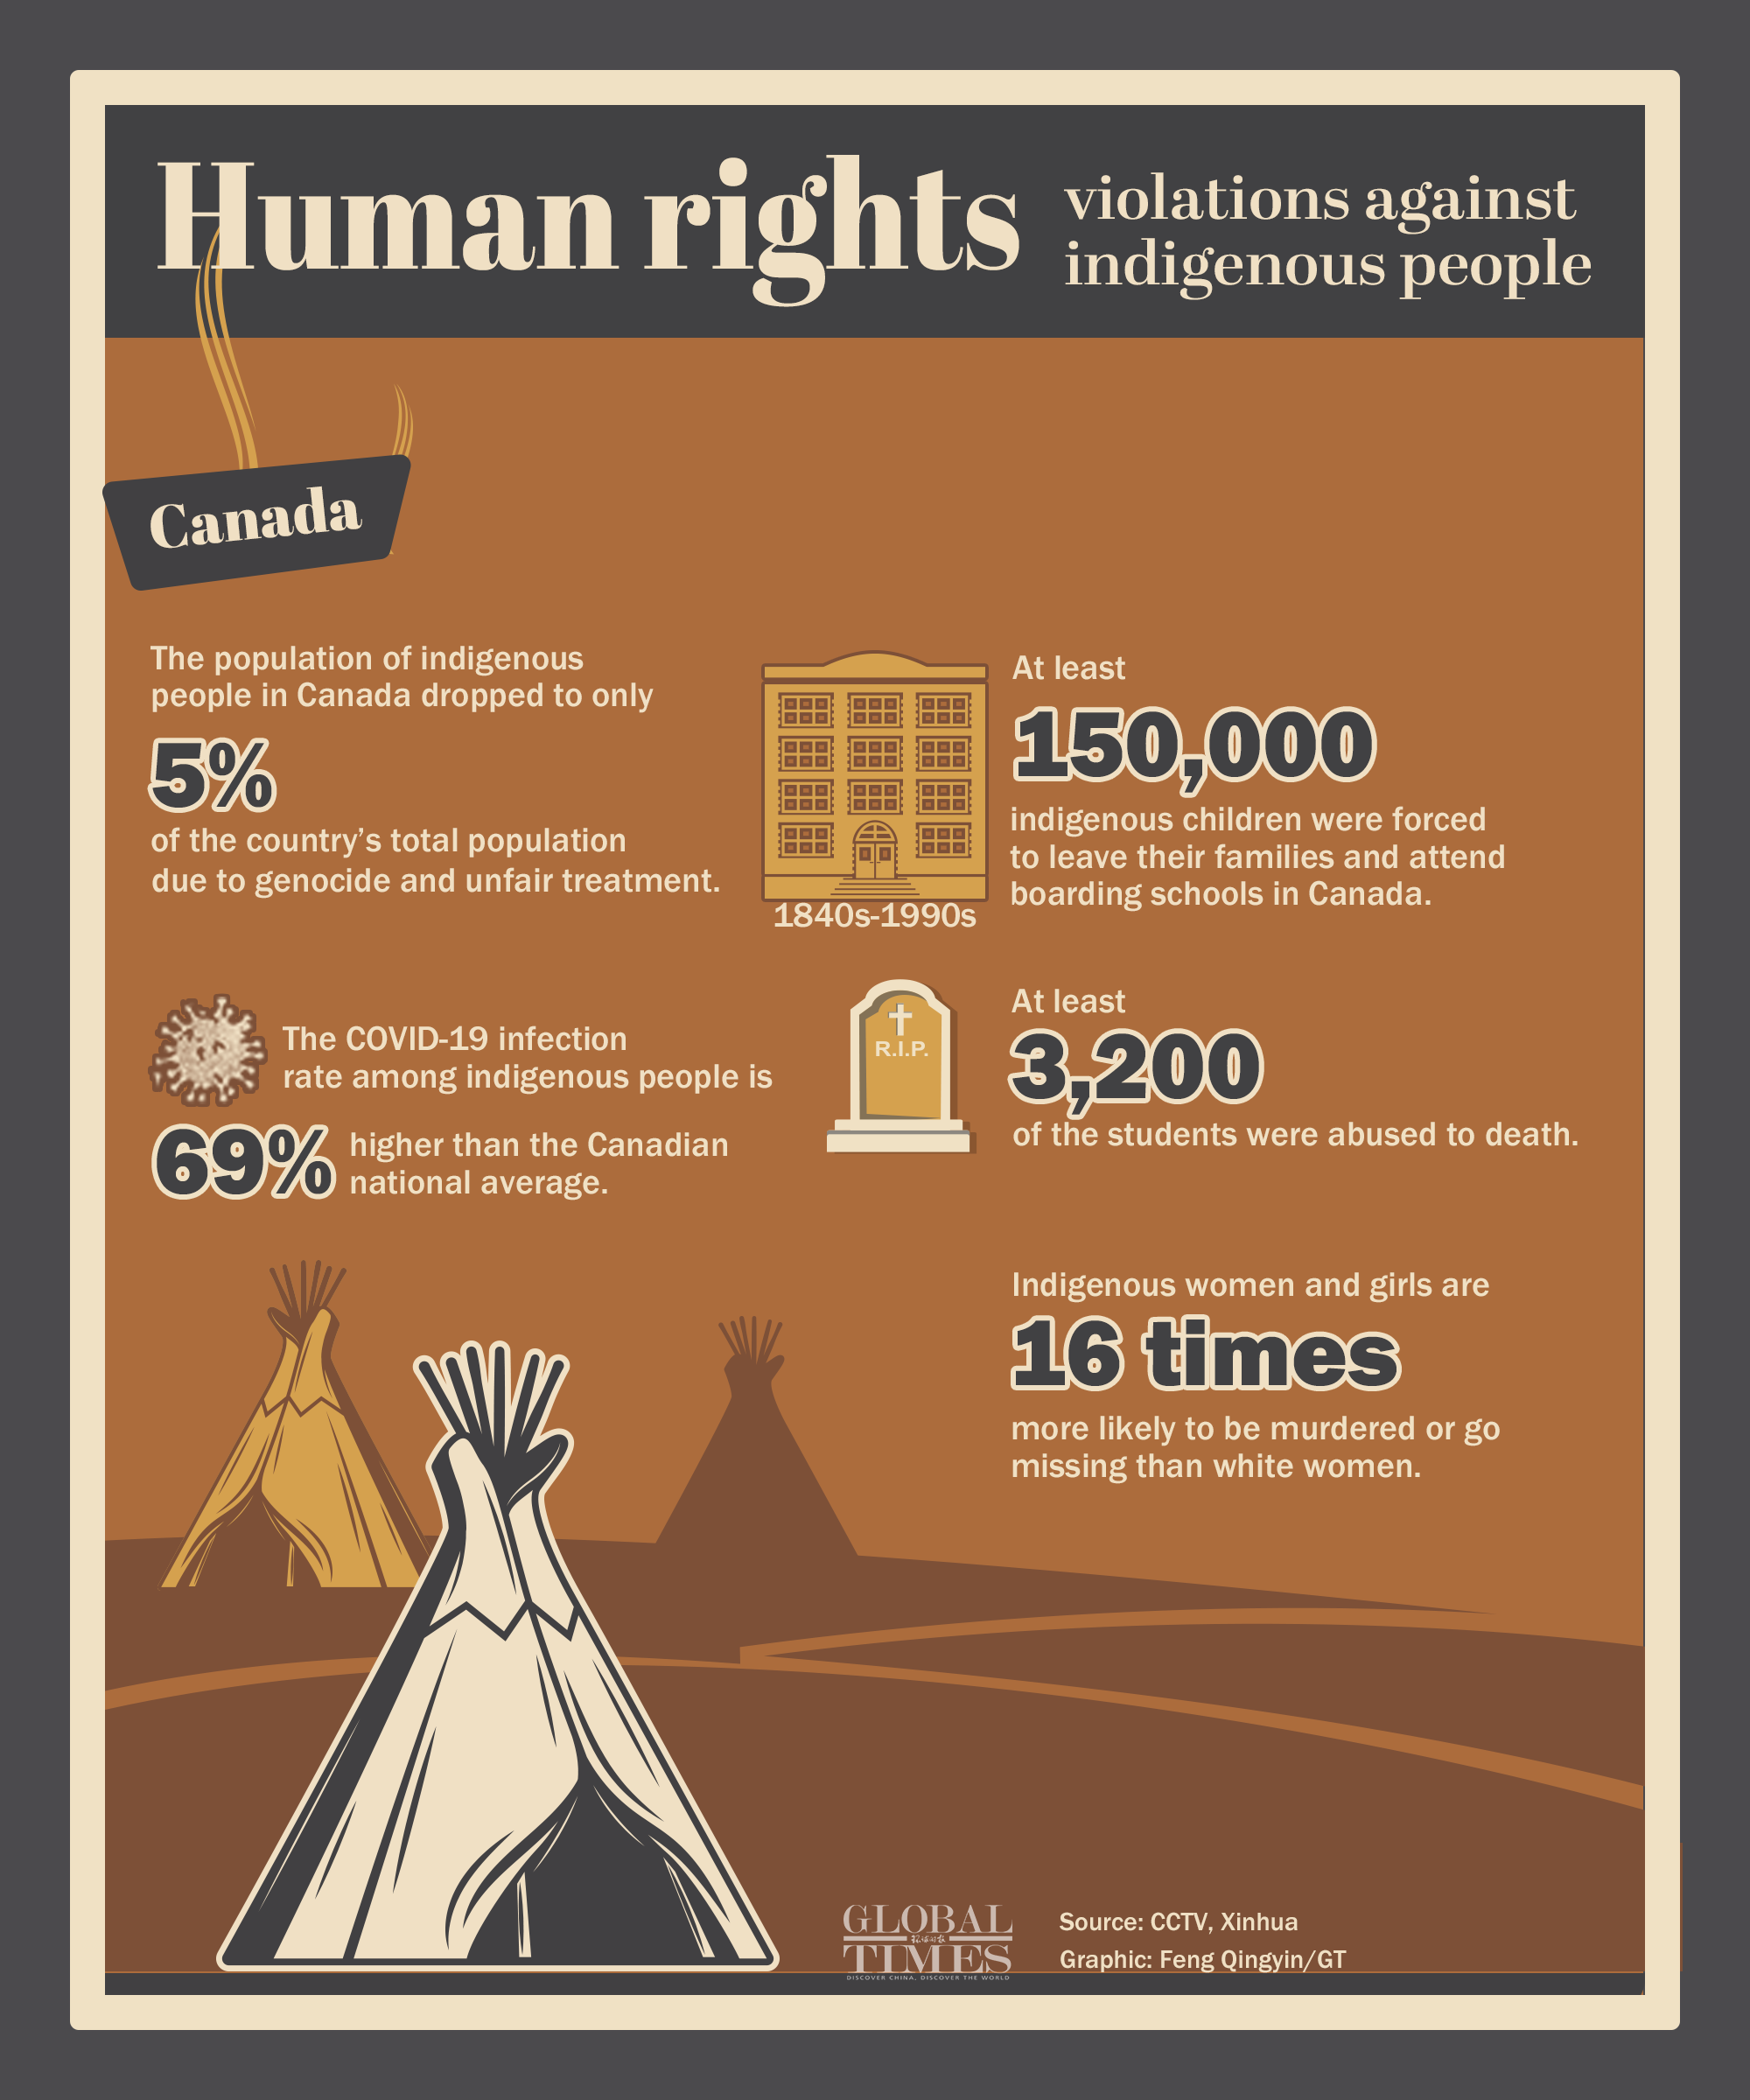 Human rights violations against indigenous people in Canada Graphic: Feng Qingyin/GT